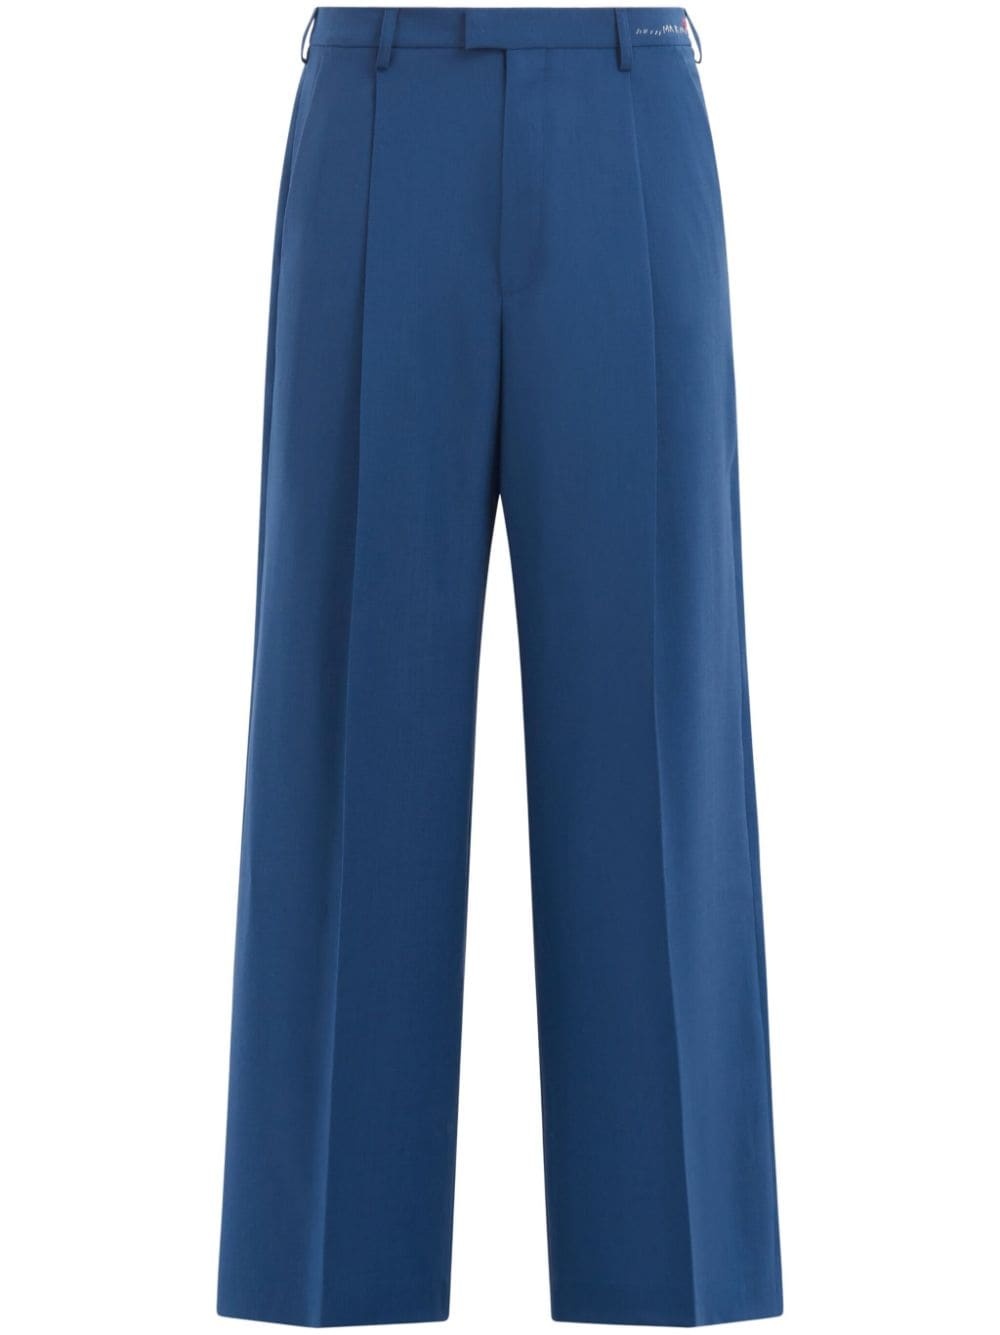 pleat-detail tailored trousers - 1